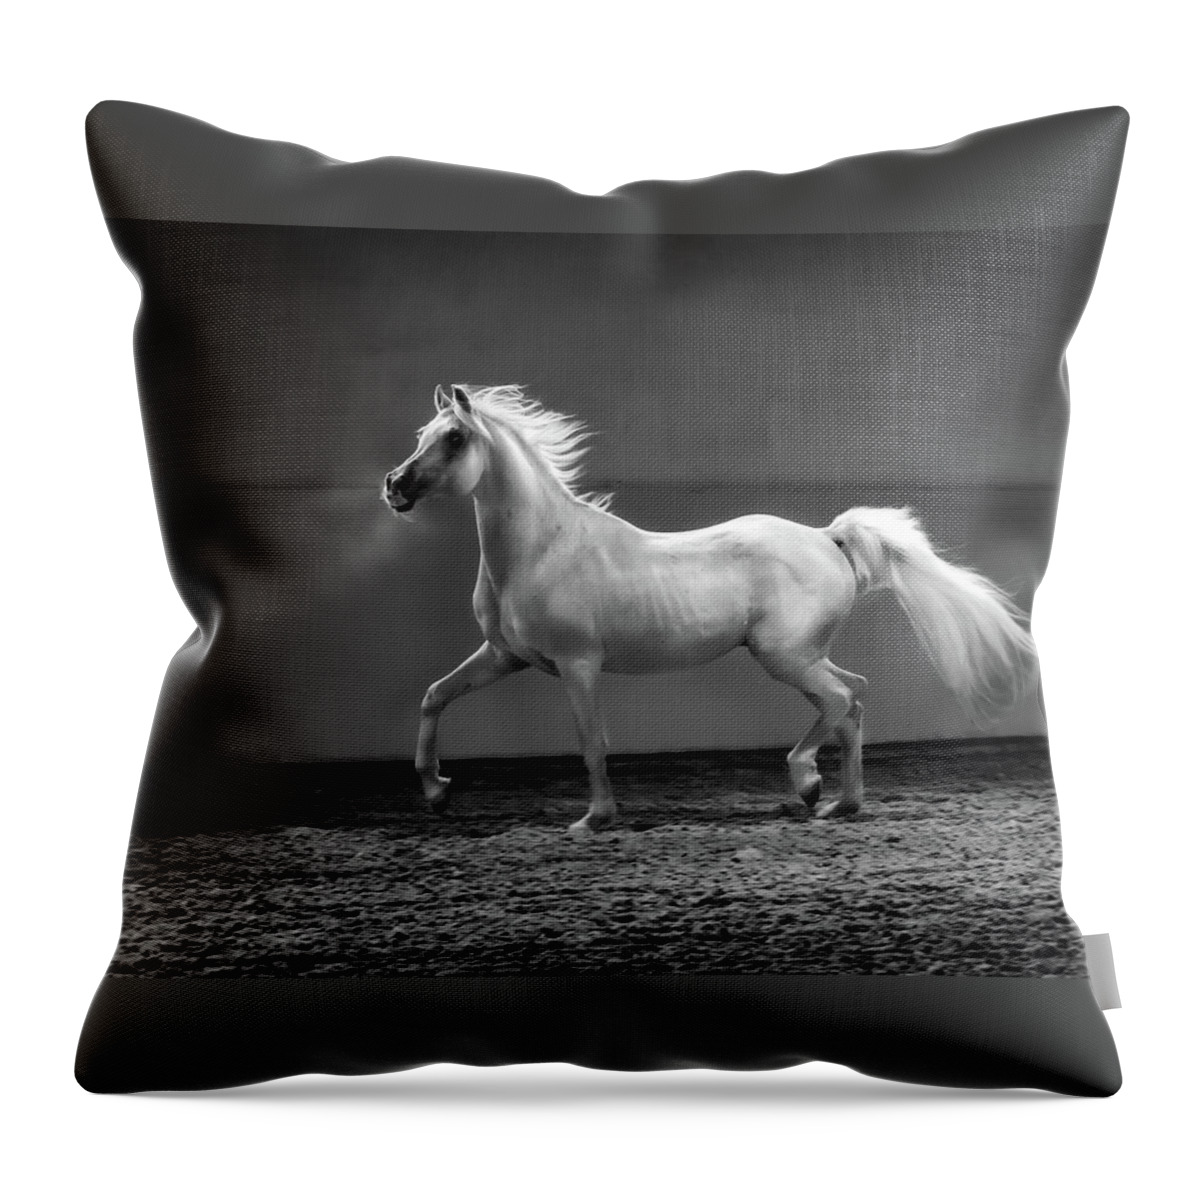 Horse Throw Pillow featuring the photograph Proud Arabian Horse - Stallion In by Kerrick